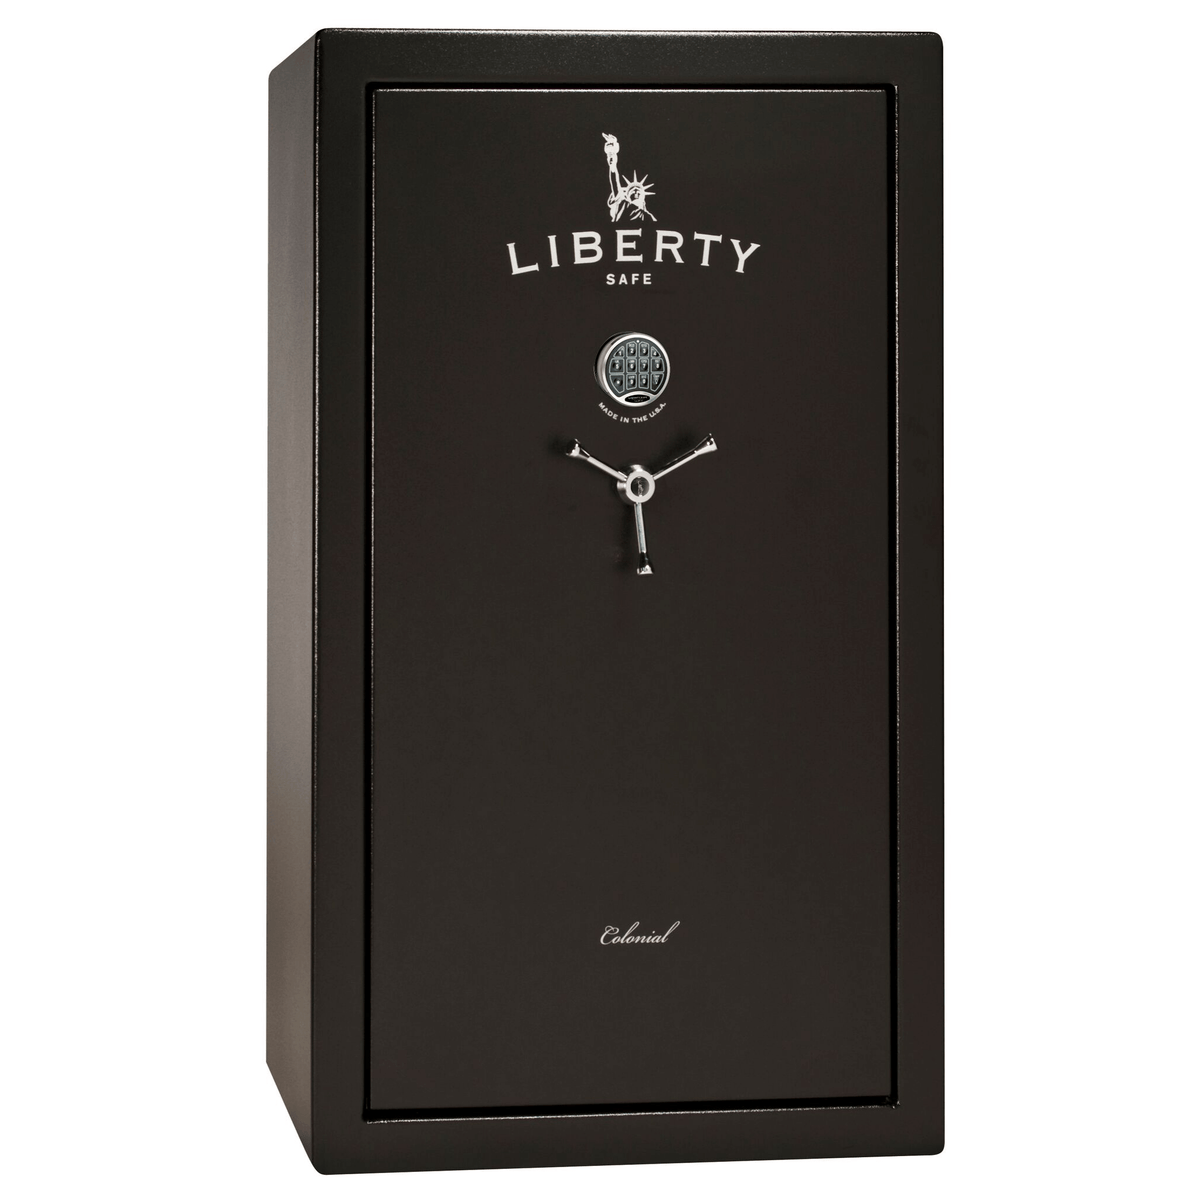 Liberty Colonial 30 Safe in Textured Black with Chrome Electronic Lock.